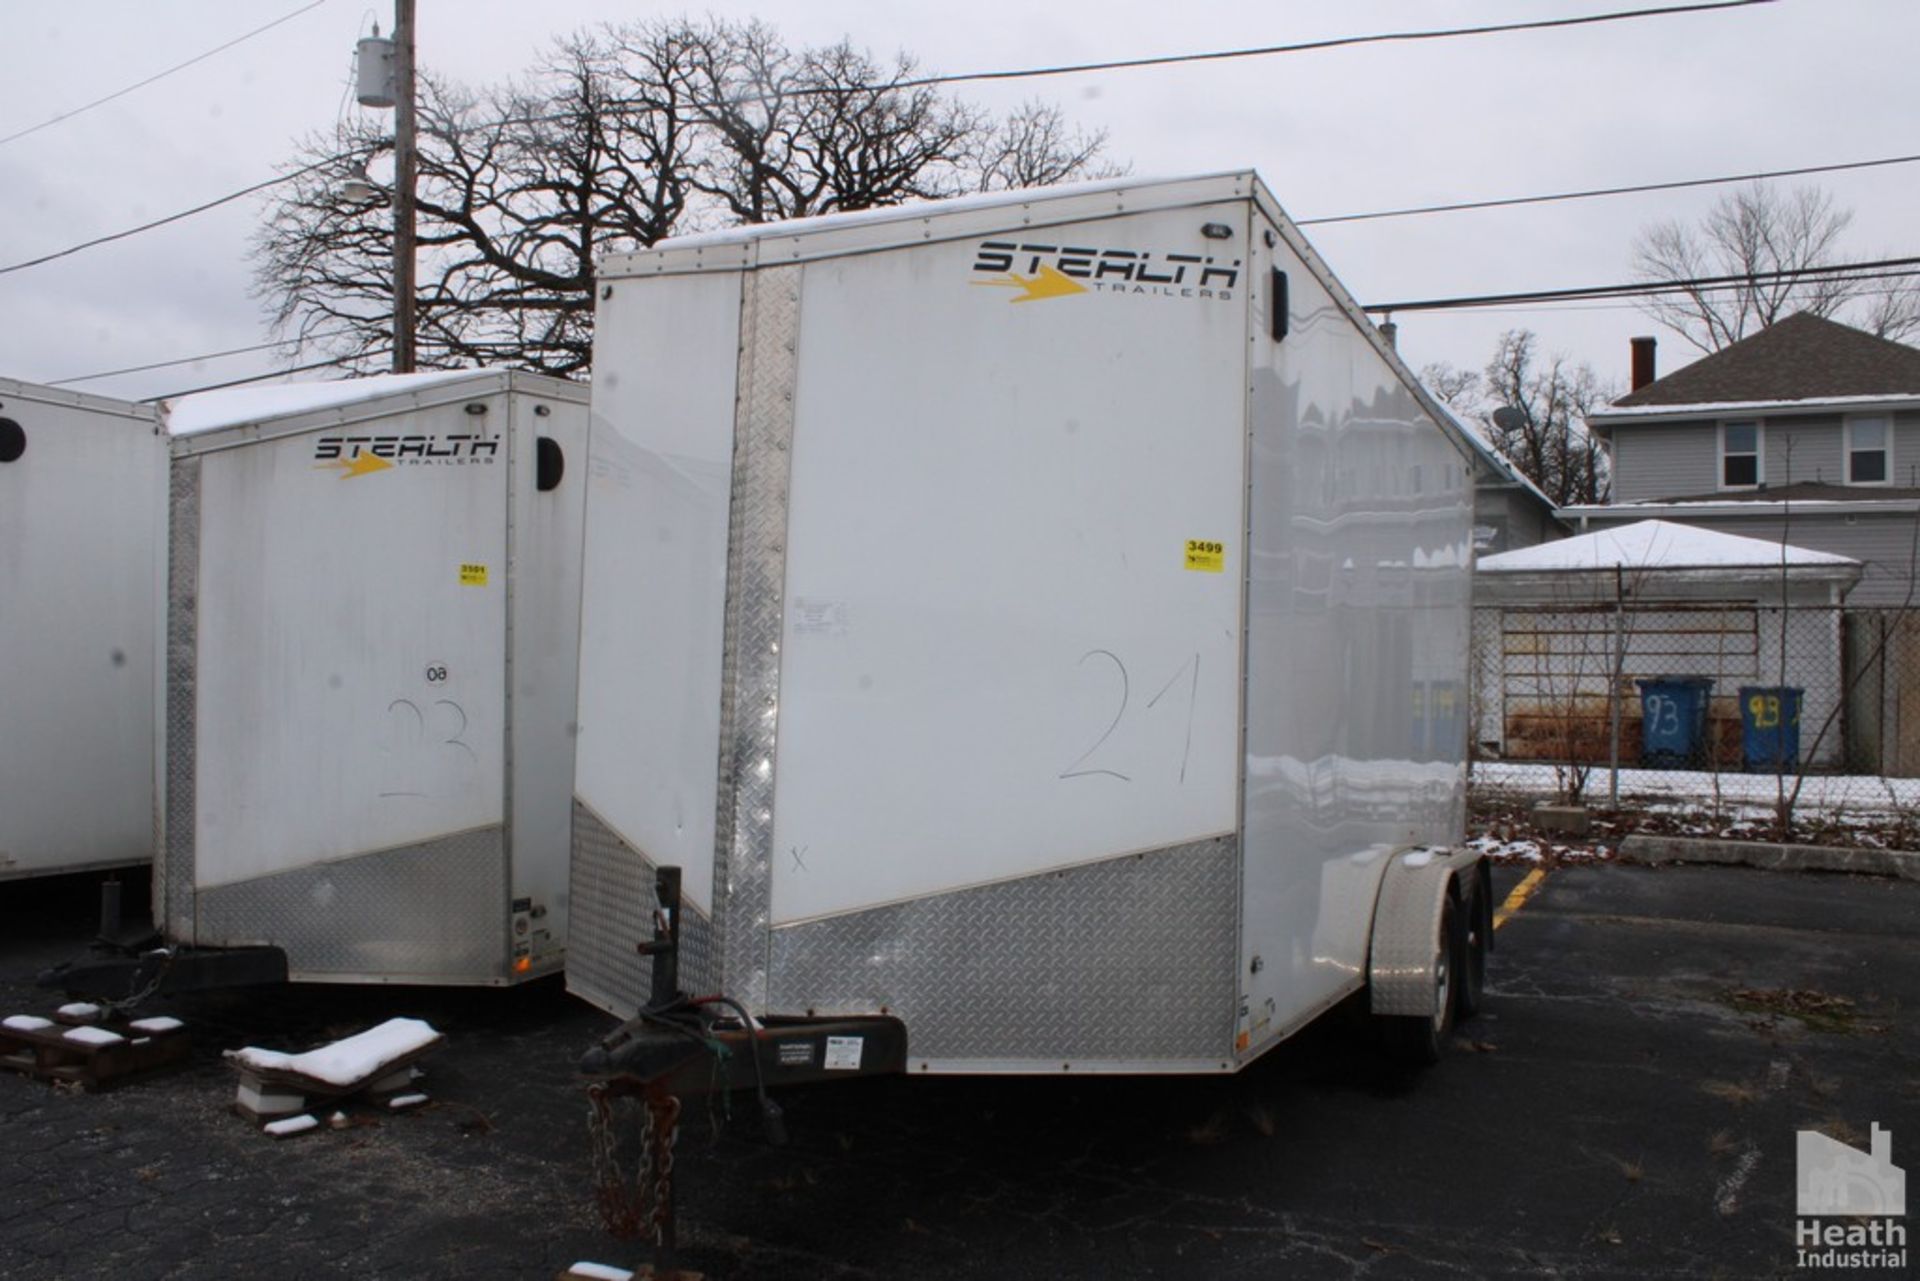 STEALTH 14’ ENCLOSED TRAILER, VIN: 52LBE1421LE077652 (NEW 2020), WITH SIDE DOOR, DROP DOWN BACK